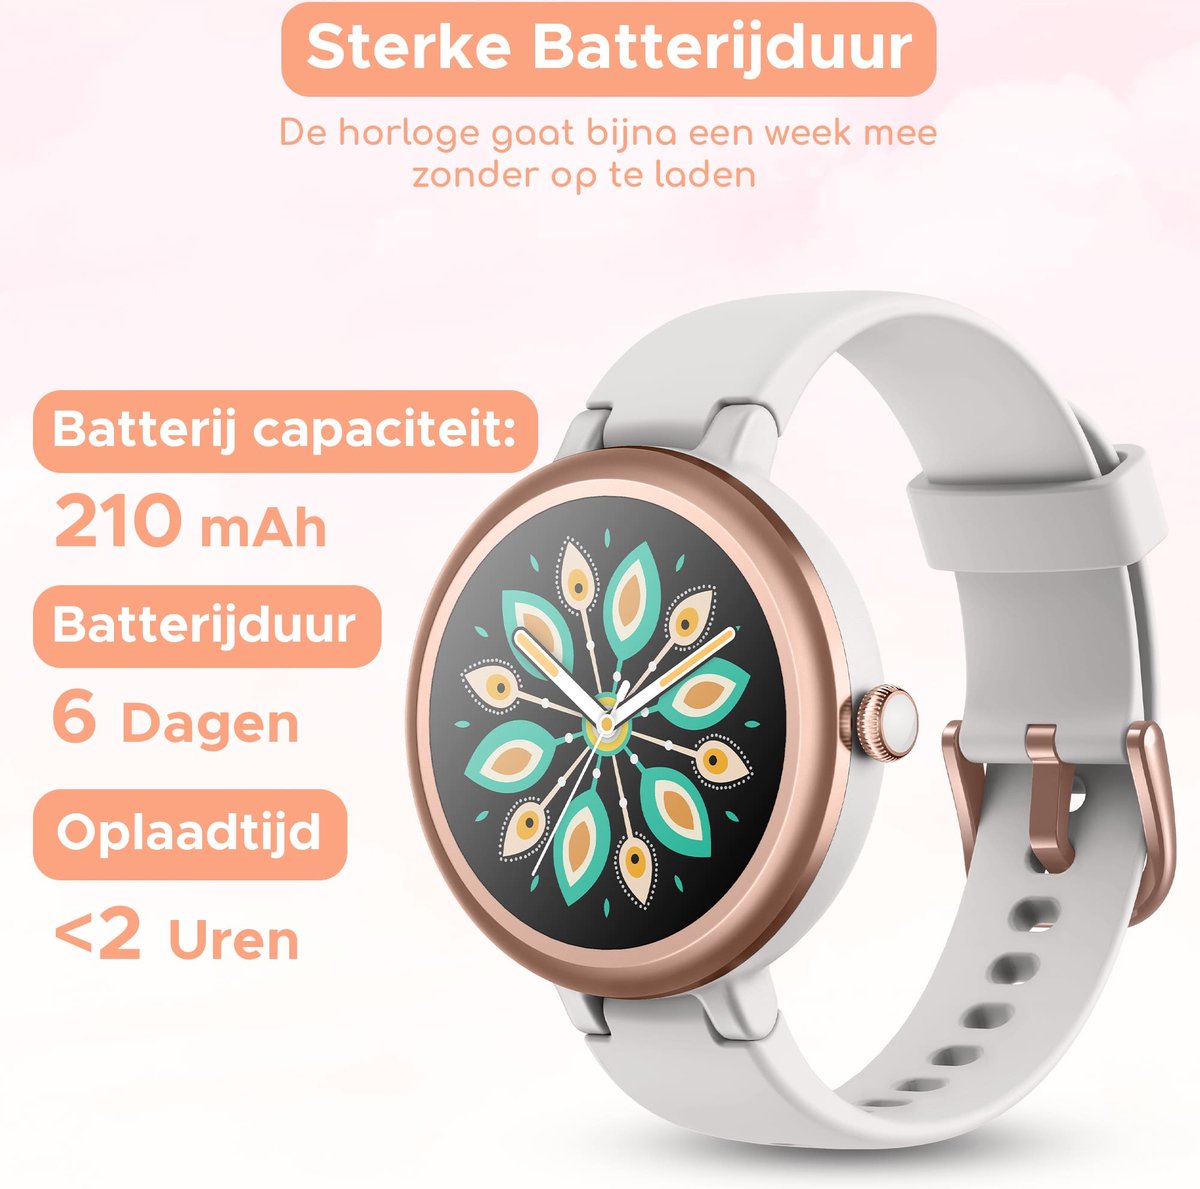 Montre Connectée Femme Or Rose SY22 - Samsung - Android - Apple